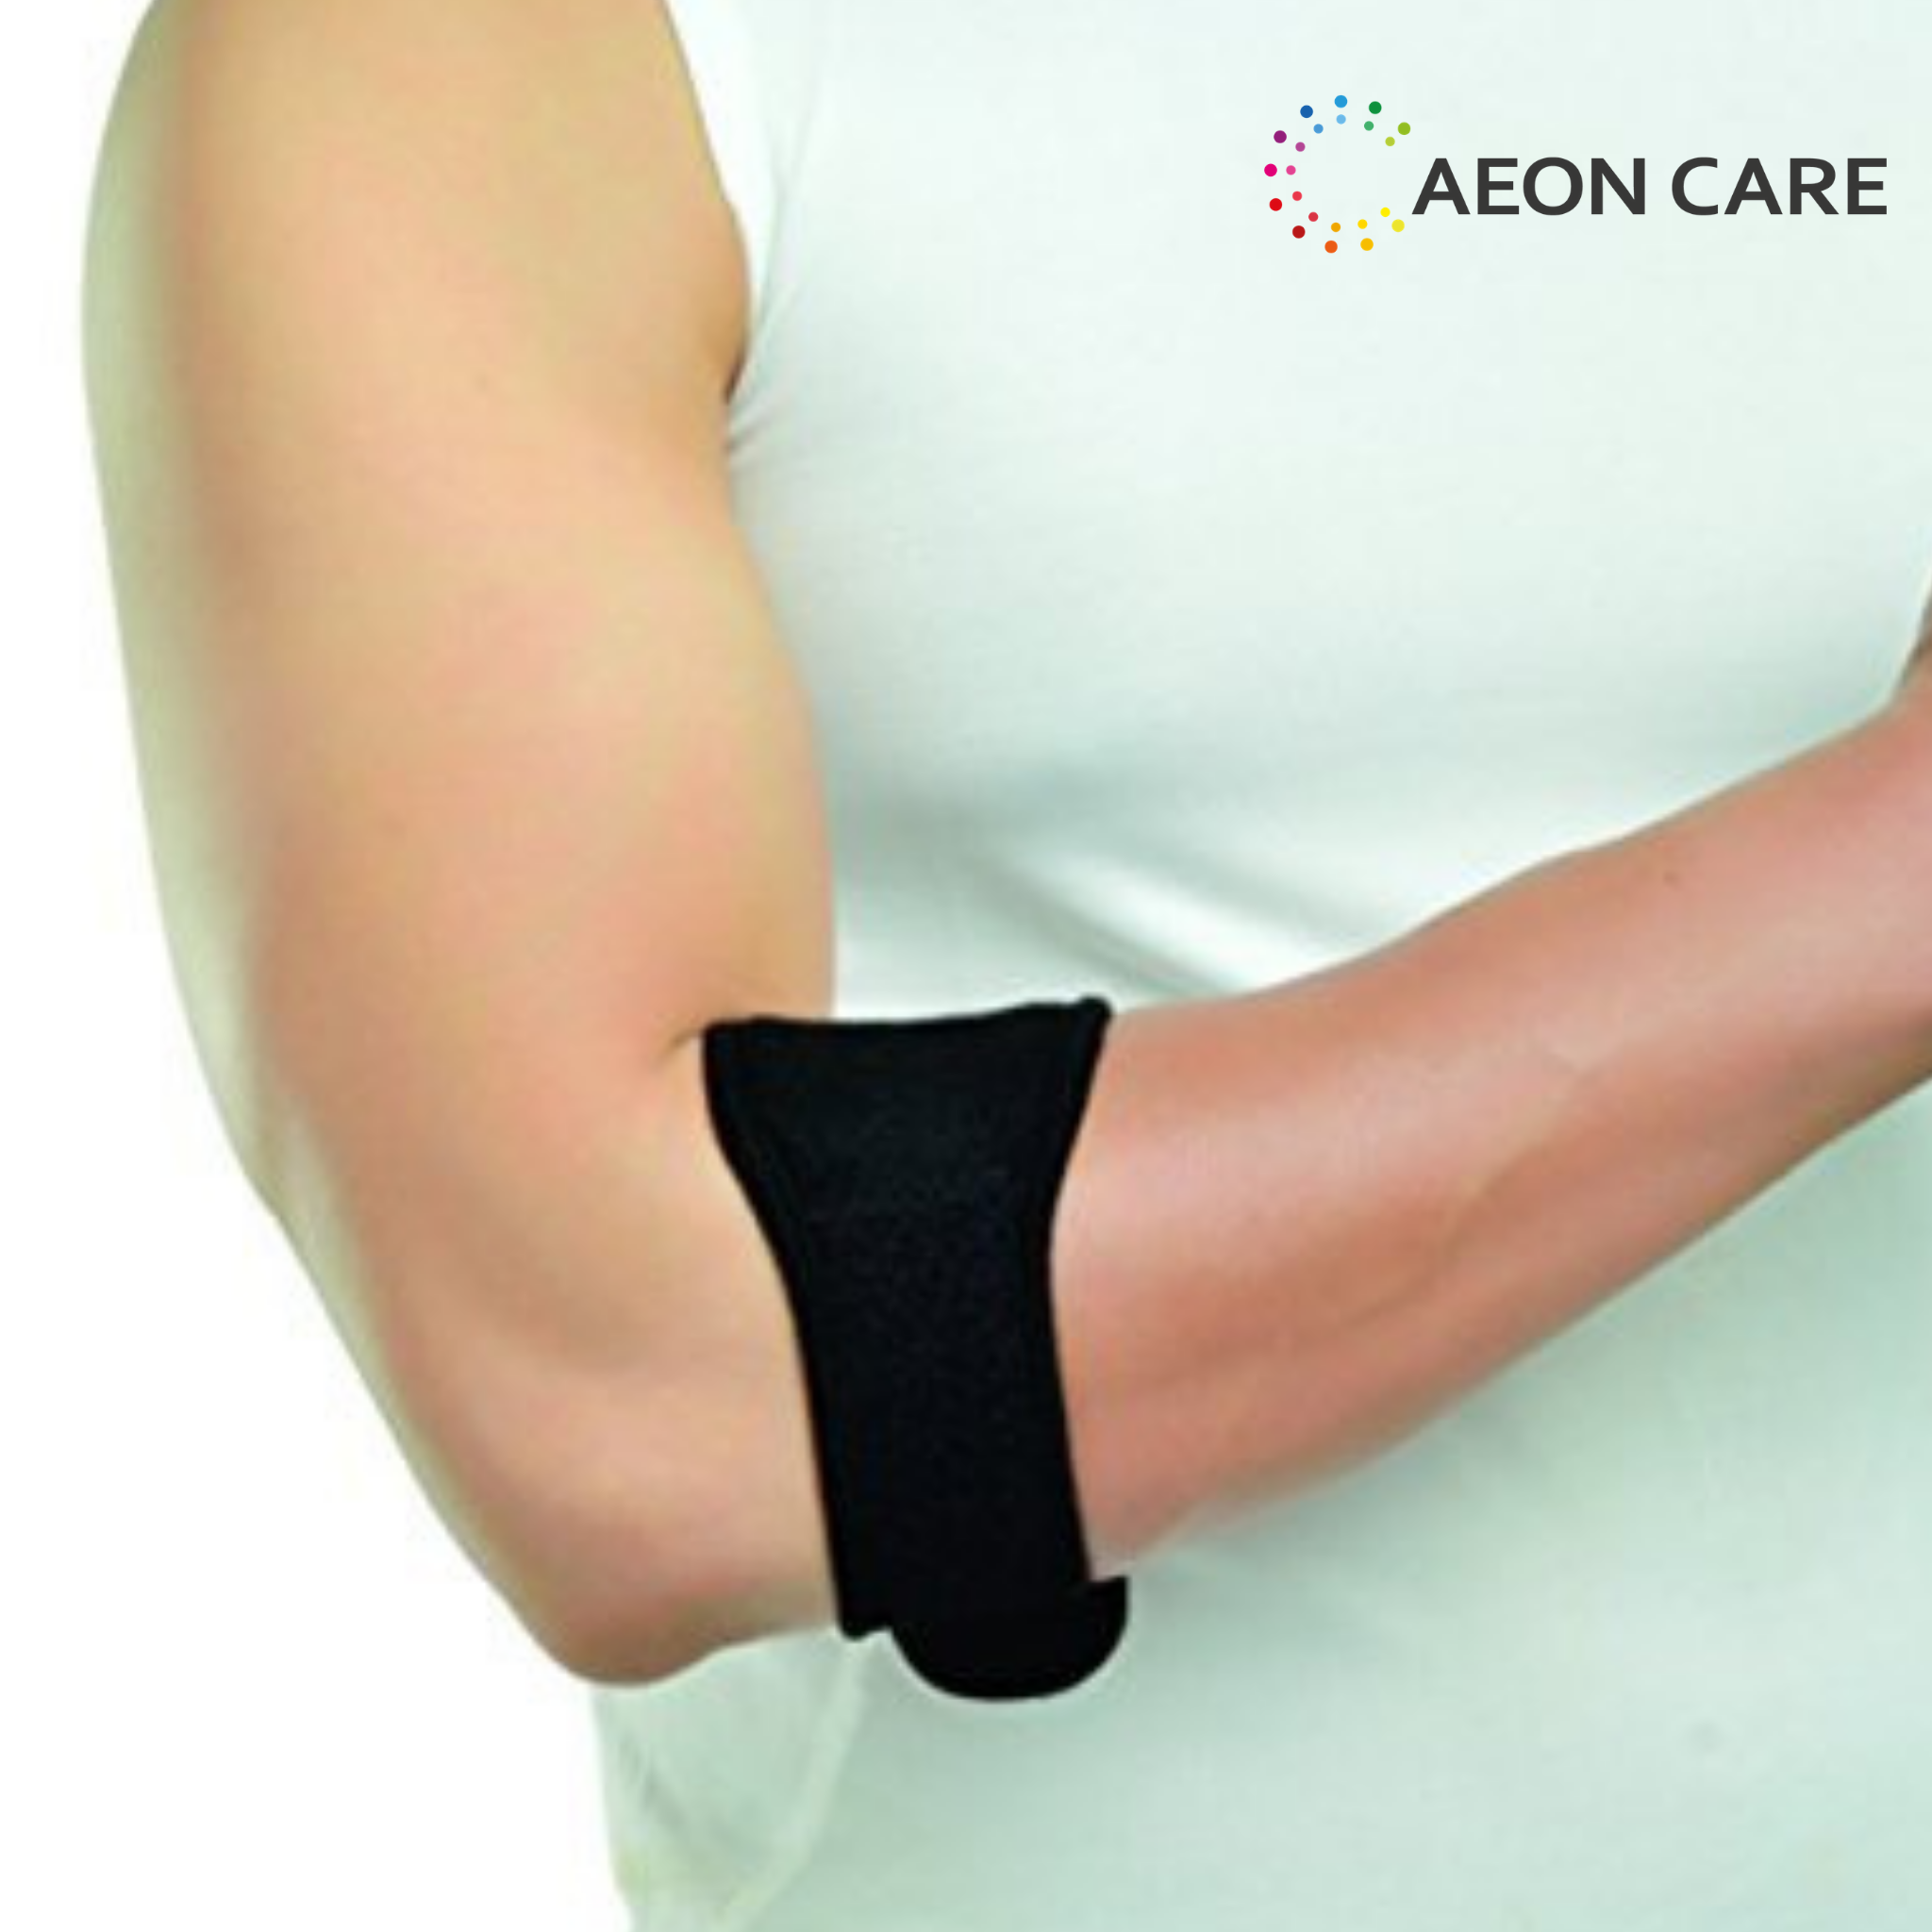 buy innolife elbow brace in Chennai. Dyna Elbow Brace can used to support the elbow